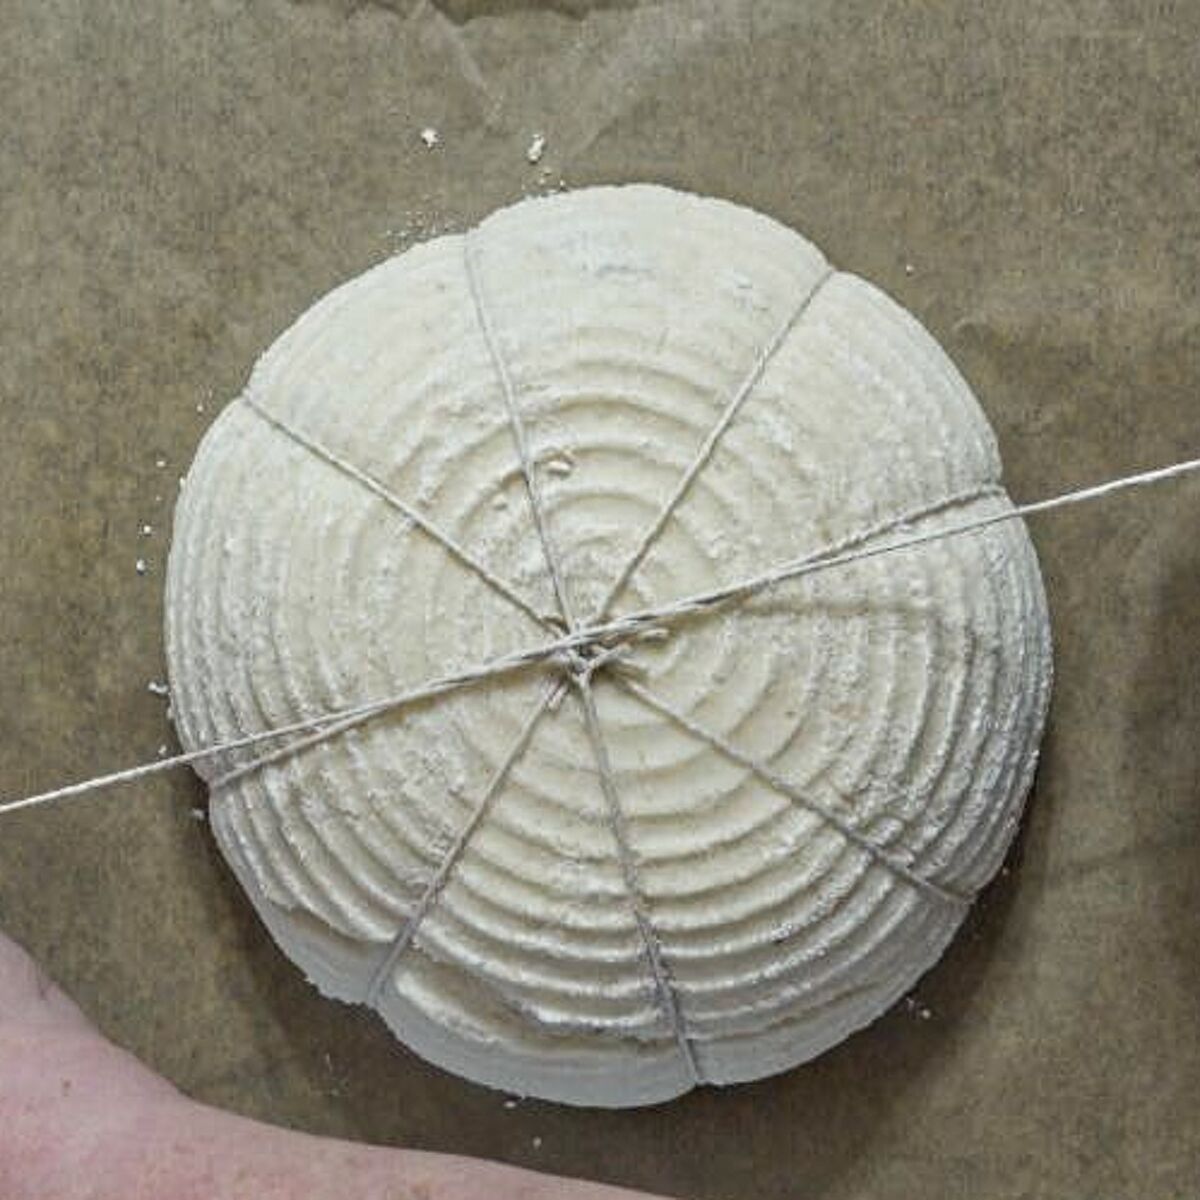 tying strings on top of dough to form pumpkin shape.